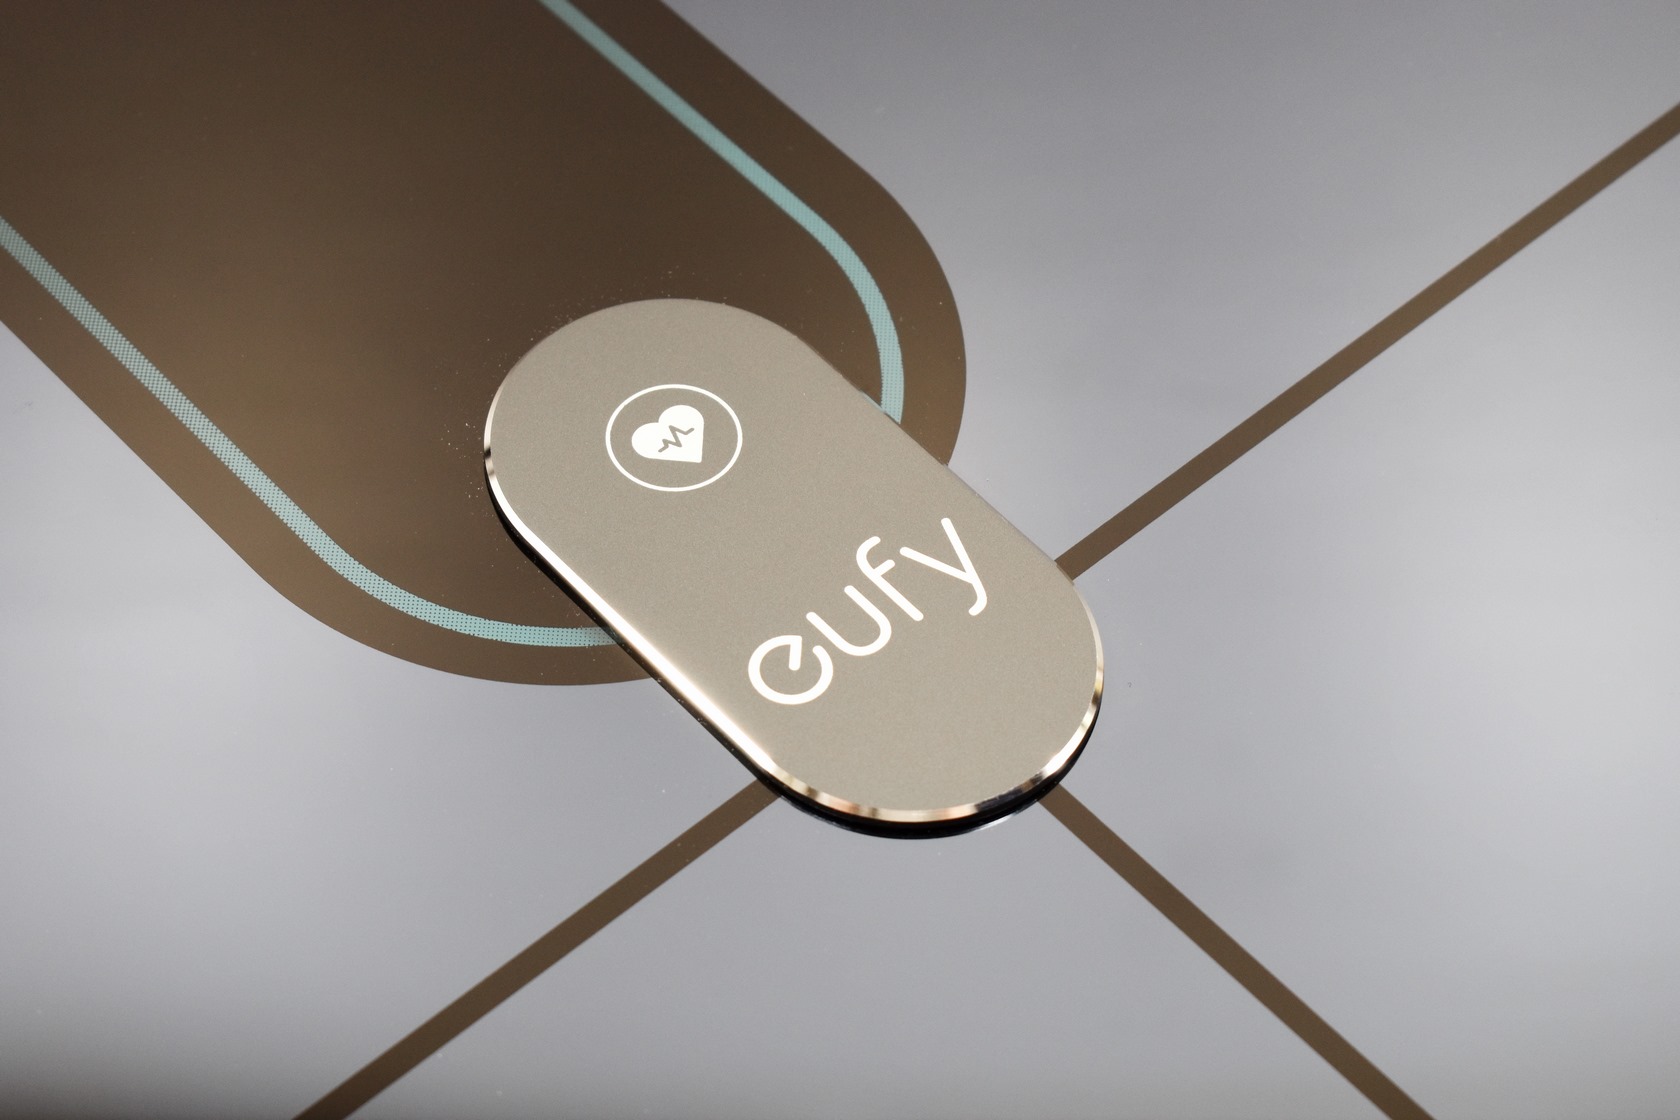 Eufy Smart Scale review